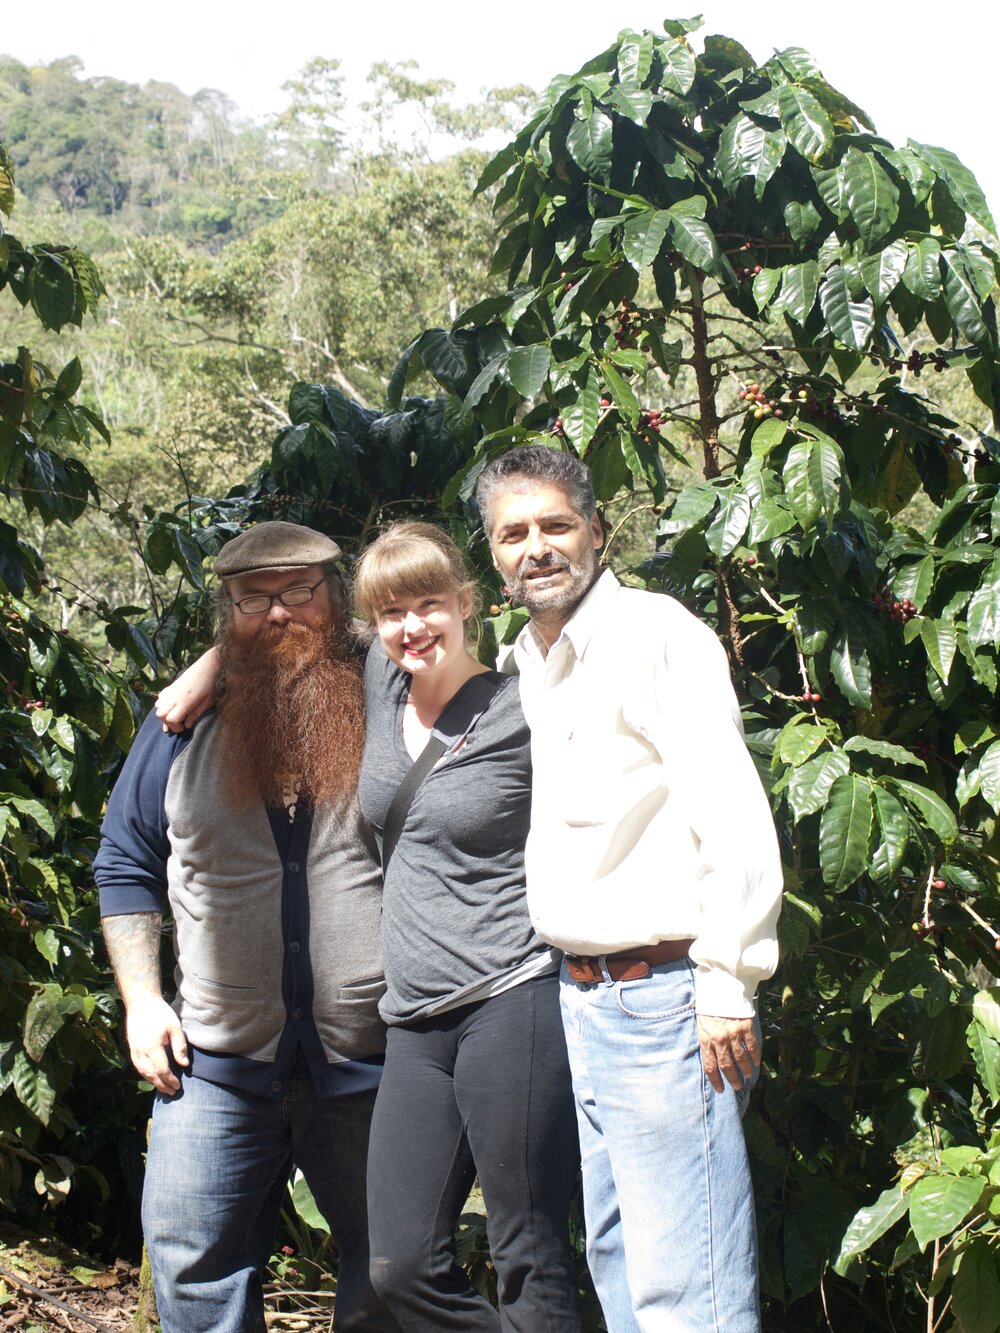 Us with Juan Luis, Peruvian coffee farmer who we worked with until he passed away, on his beautiful farm, Finca Santa Josefa.